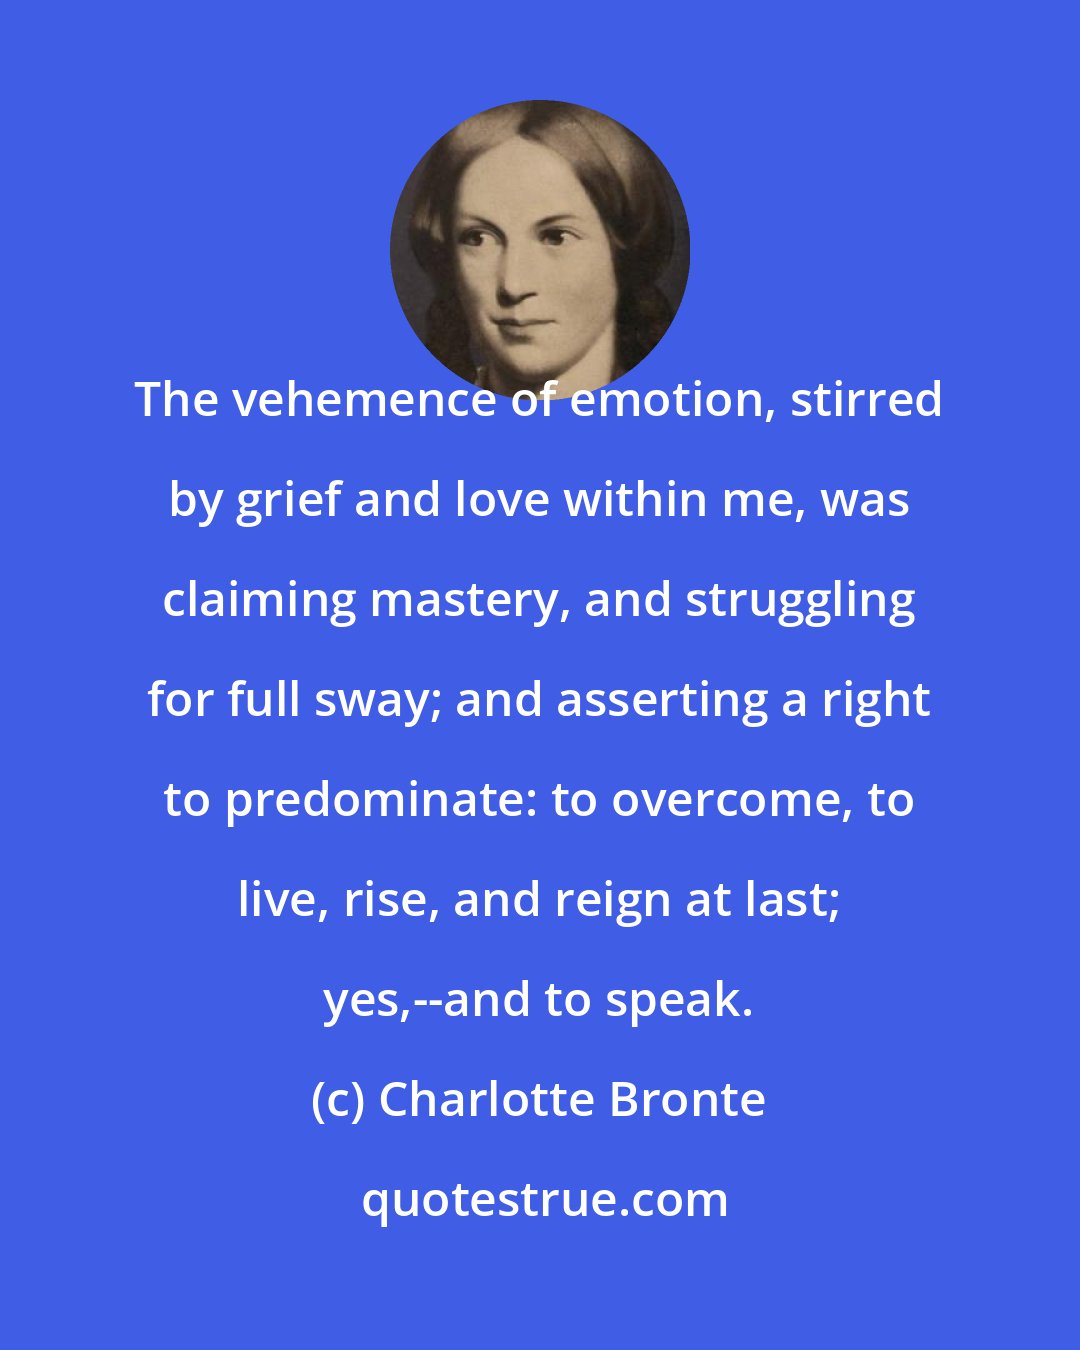 Charlotte Bronte: The vehemence of emotion, stirred by grief and love within me, was claiming mastery, and struggling for full sway; and asserting a right to predominate: to overcome, to live, rise, and reign at last; yes,--and to speak.